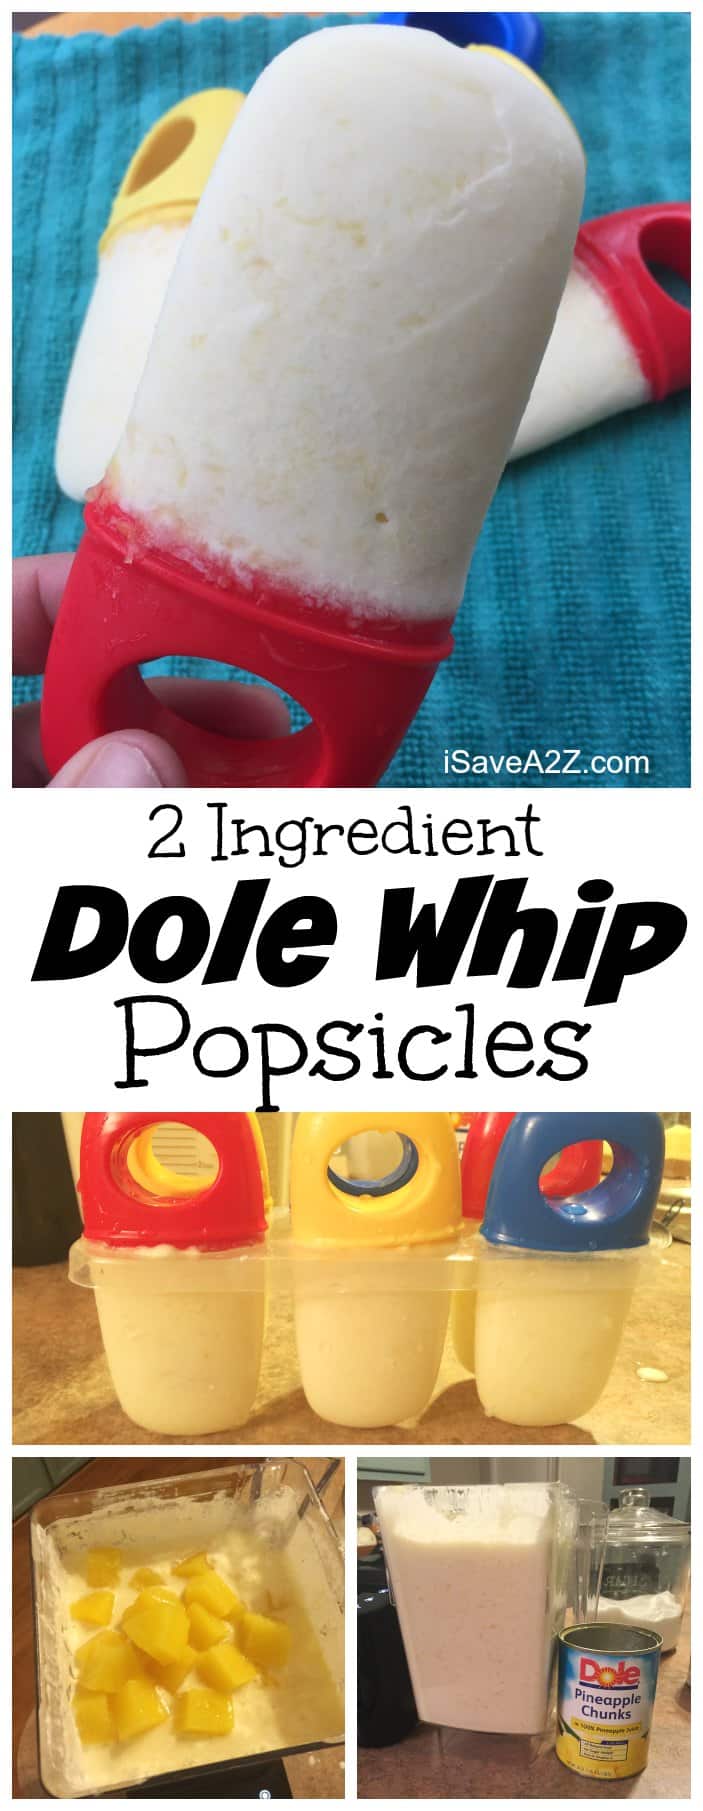 2 ingredient Dole Whip Popsicles